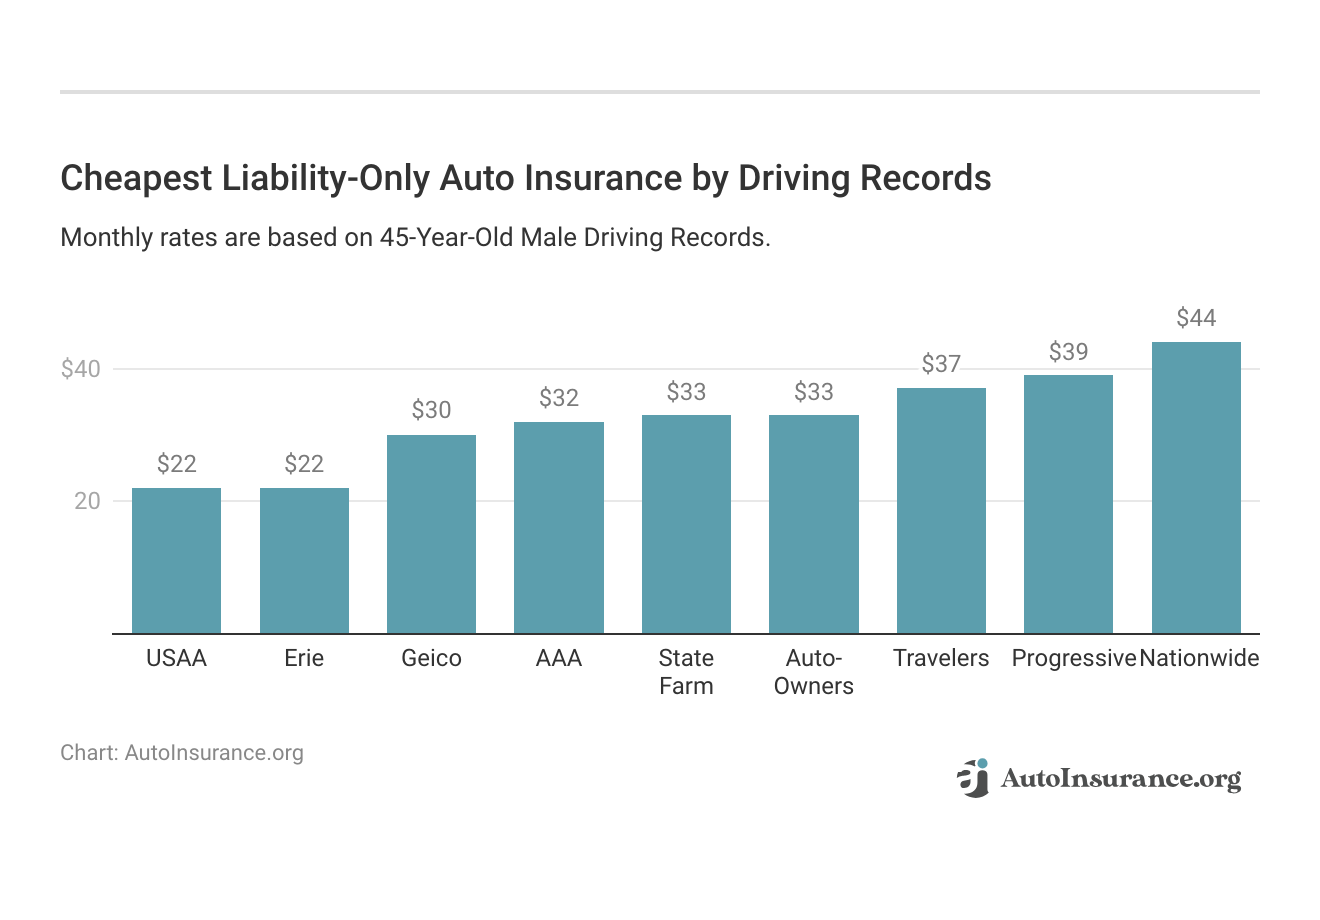 <h3>Cheapest Liability-Only Auto Insurance by Driving Records</h3>